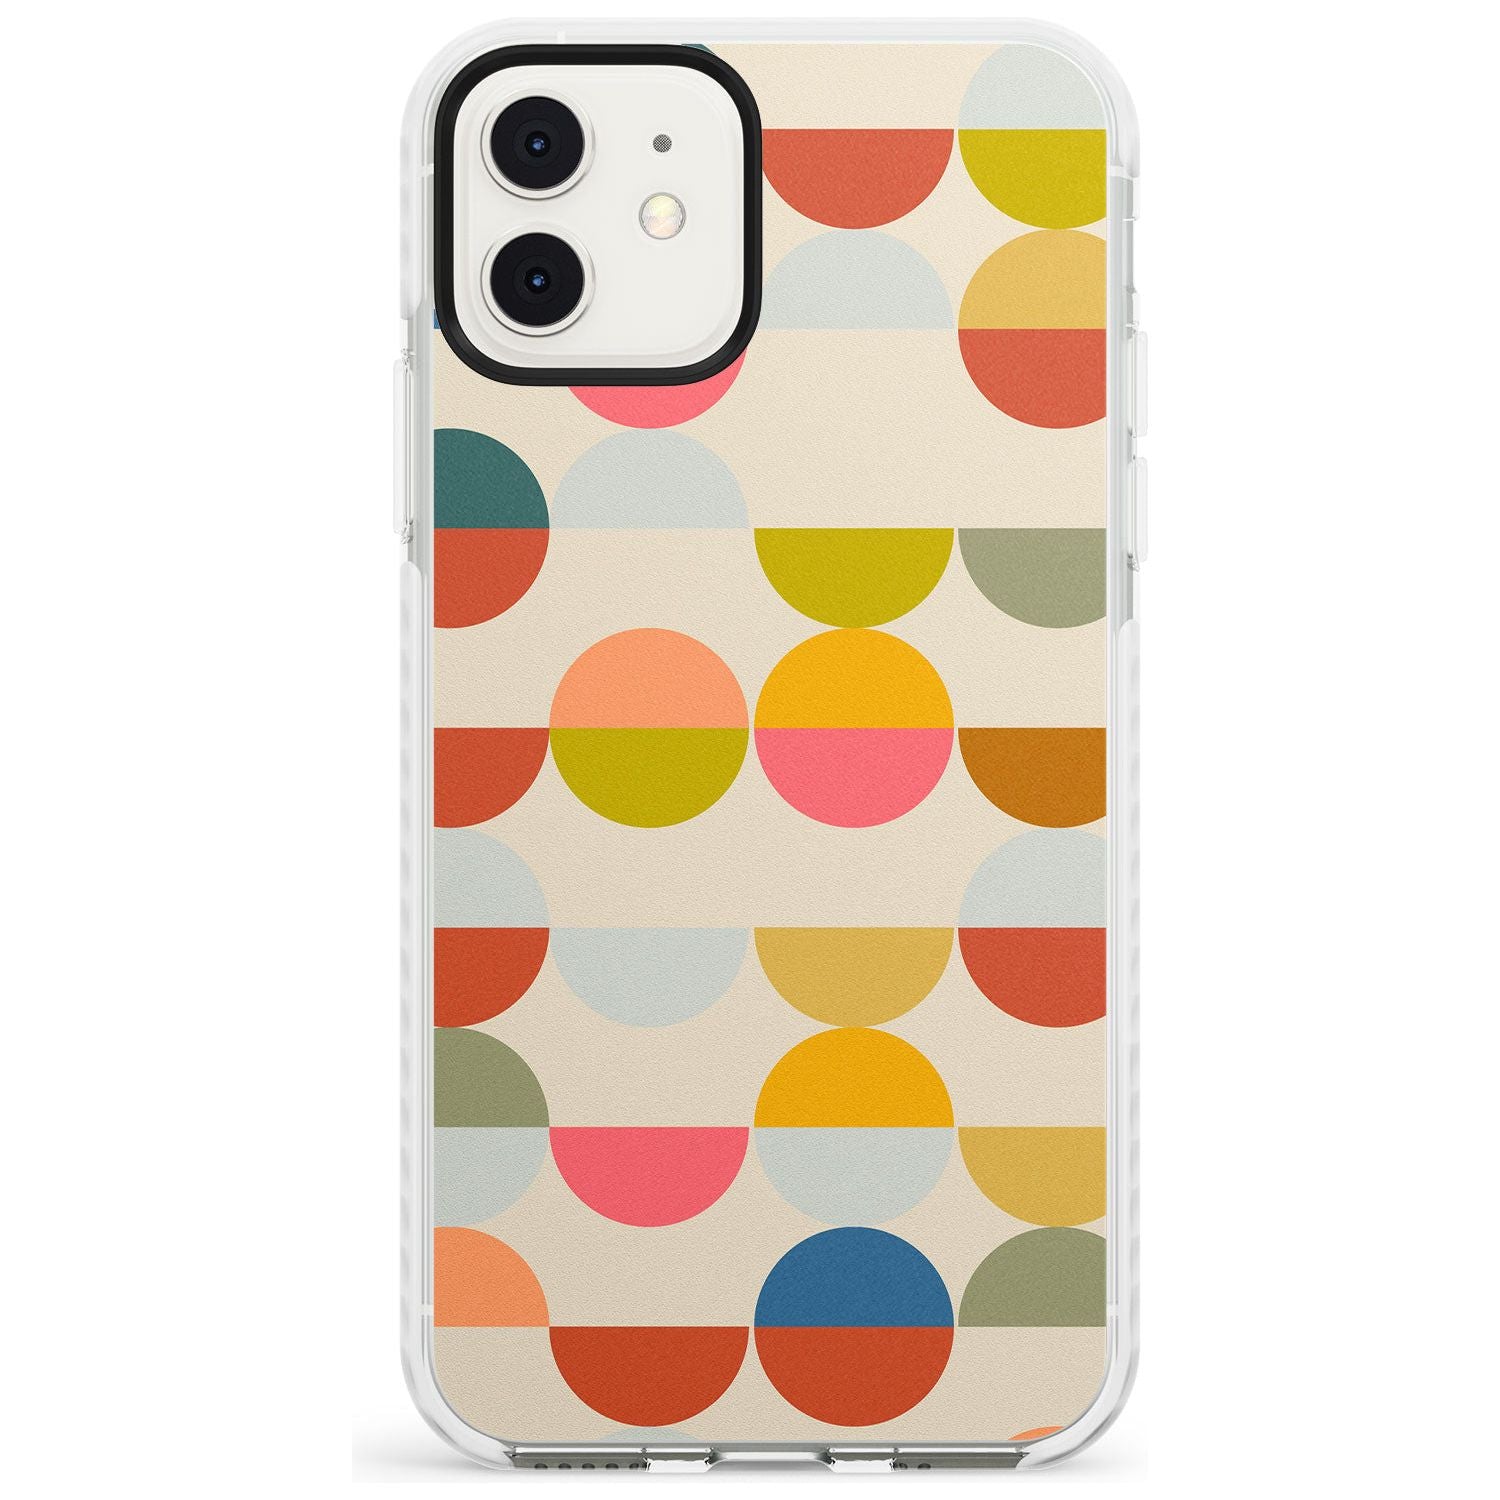 Abstract Retro Shapes: Colourful Circles Slim TPU Phone Case for iPhone 11